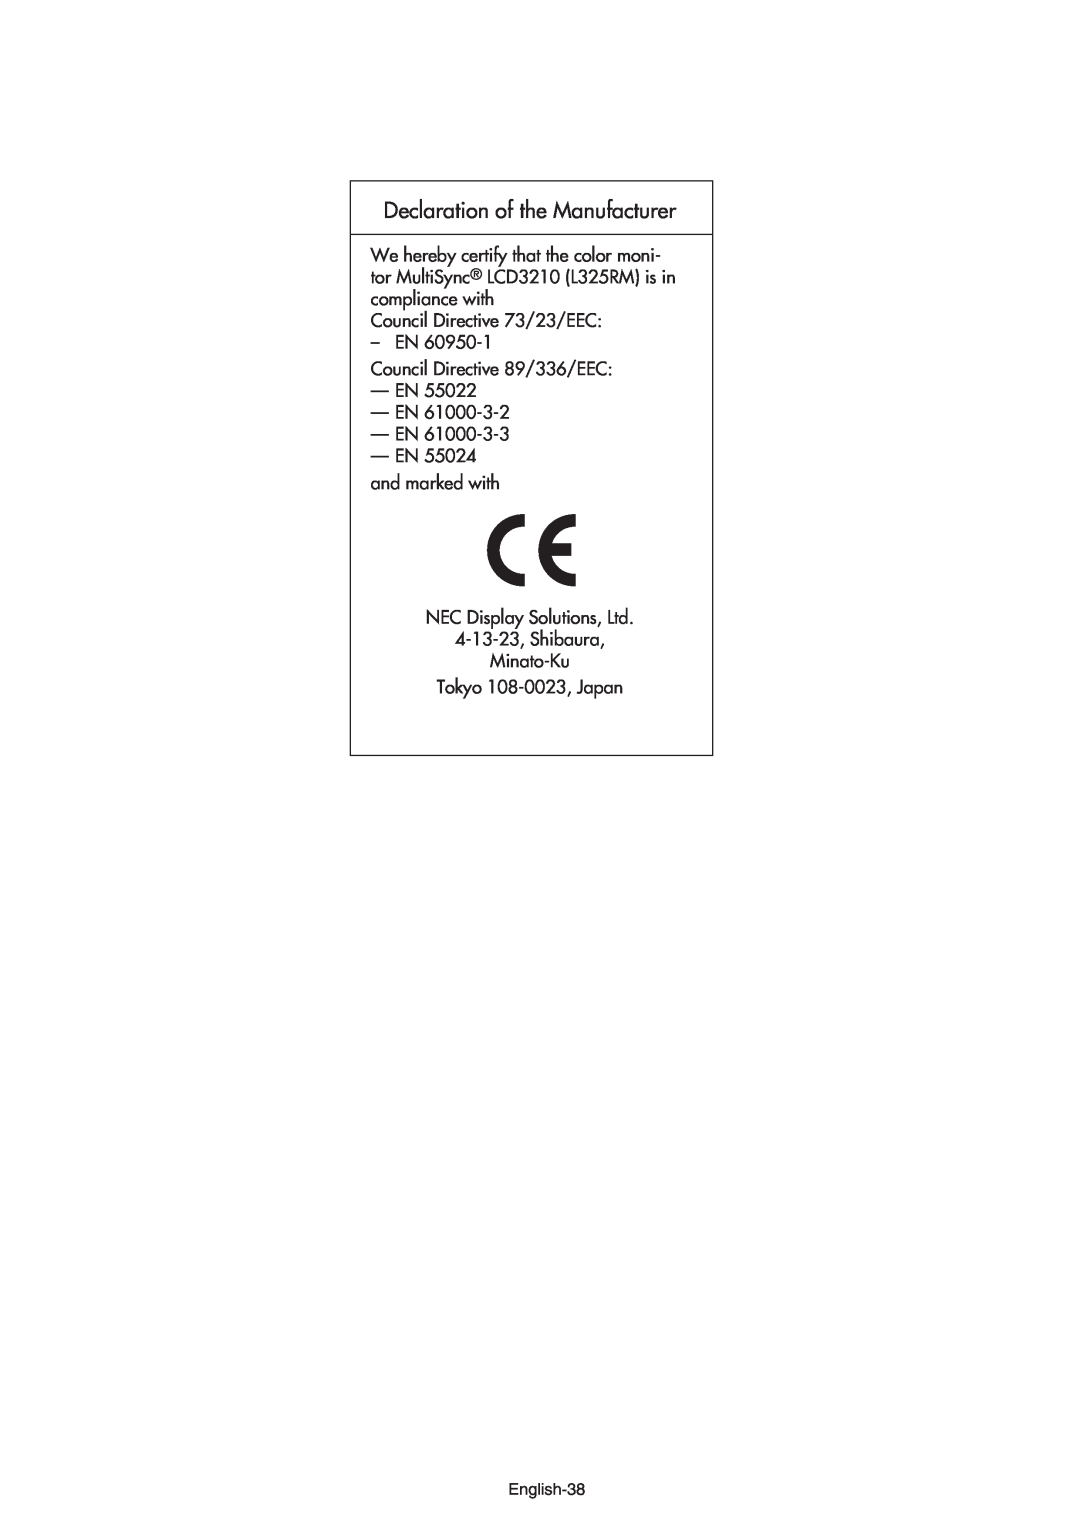 NEC LCD3210 Declaration of the Manufacturer, Council Directive 73/23/EEC – EN, and marked with NEC Display Solutions, Ltd 